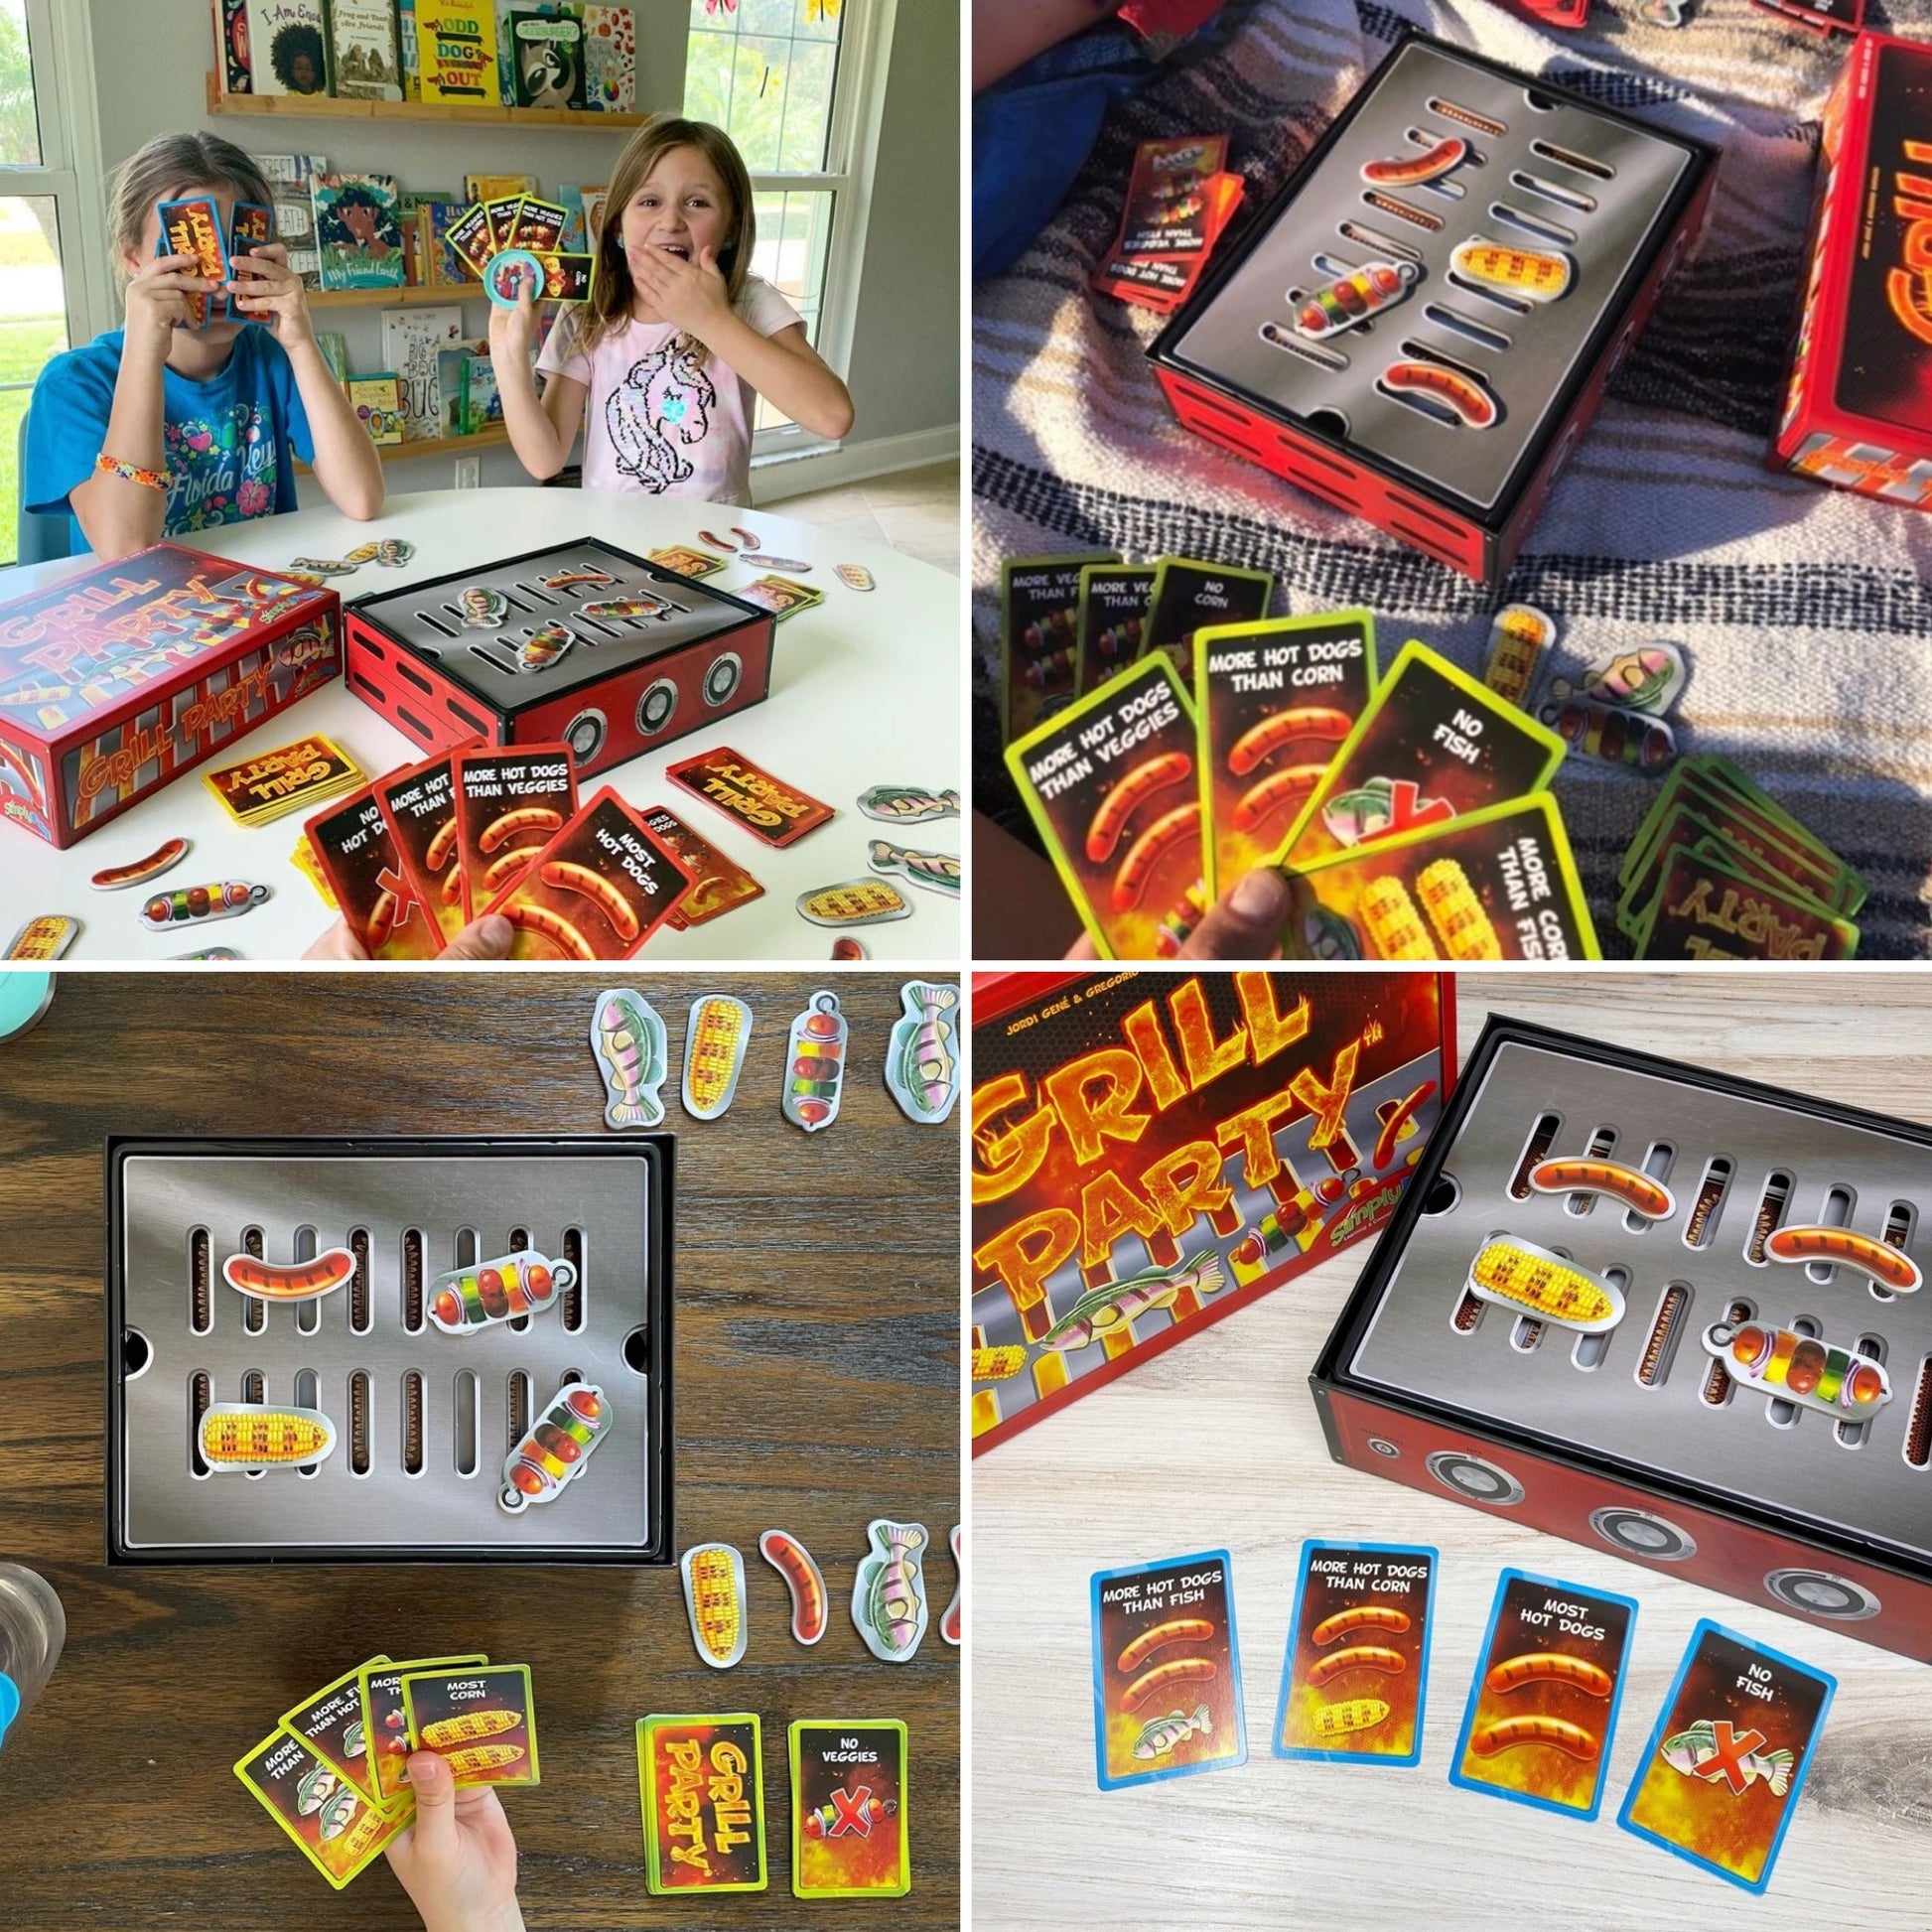 Grill Party: A BBQ algebra game for 3rd grade math